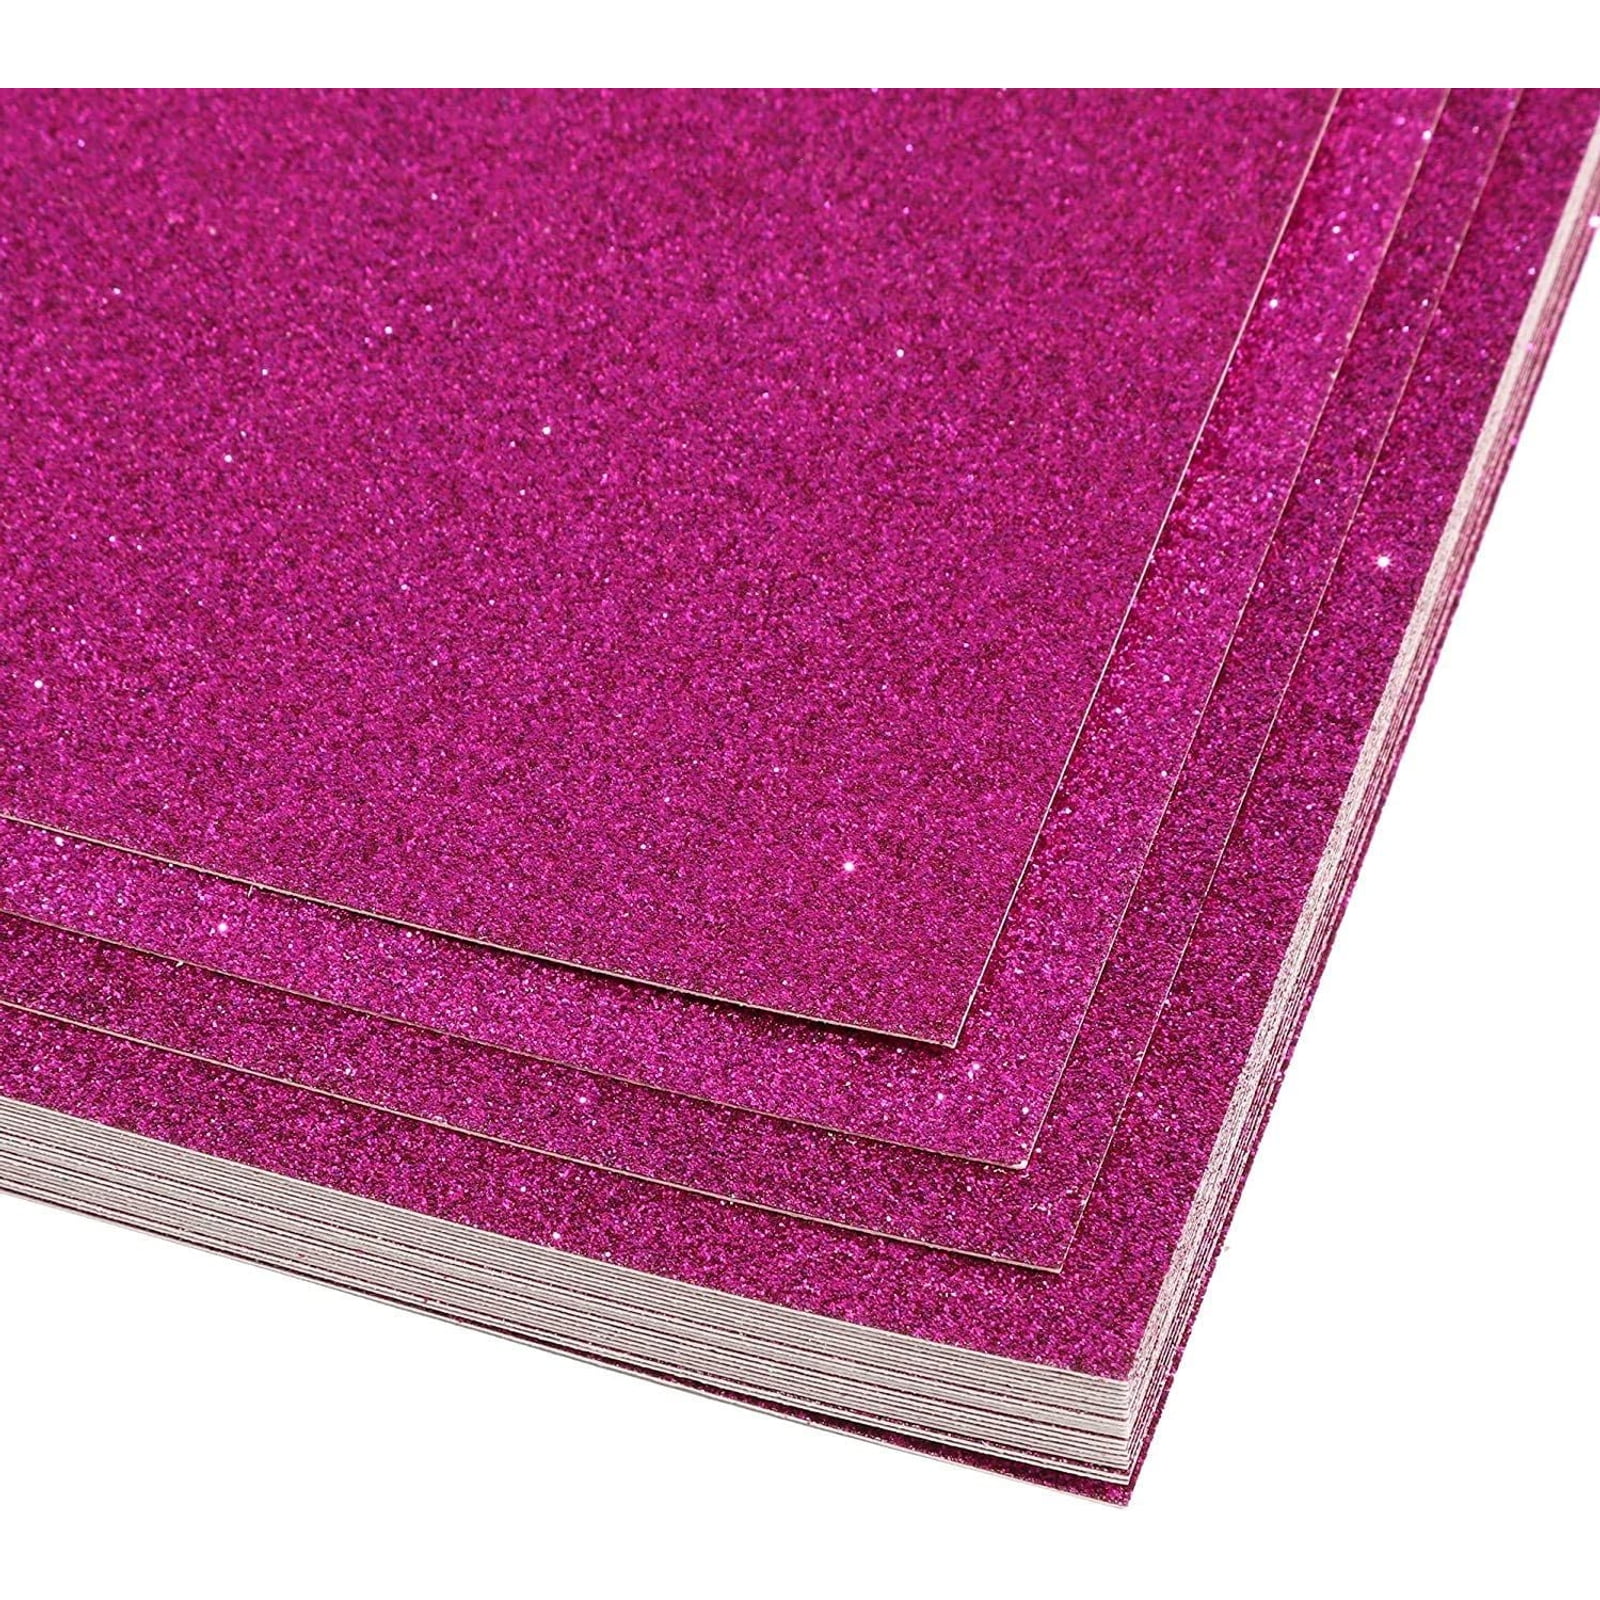 CraftyBook RNAB0B1F91XKR craftybook glitter cardstock set - 15 sheets of rose  pink 12x12in glitter paper for scrapbooking, crafting, and decor